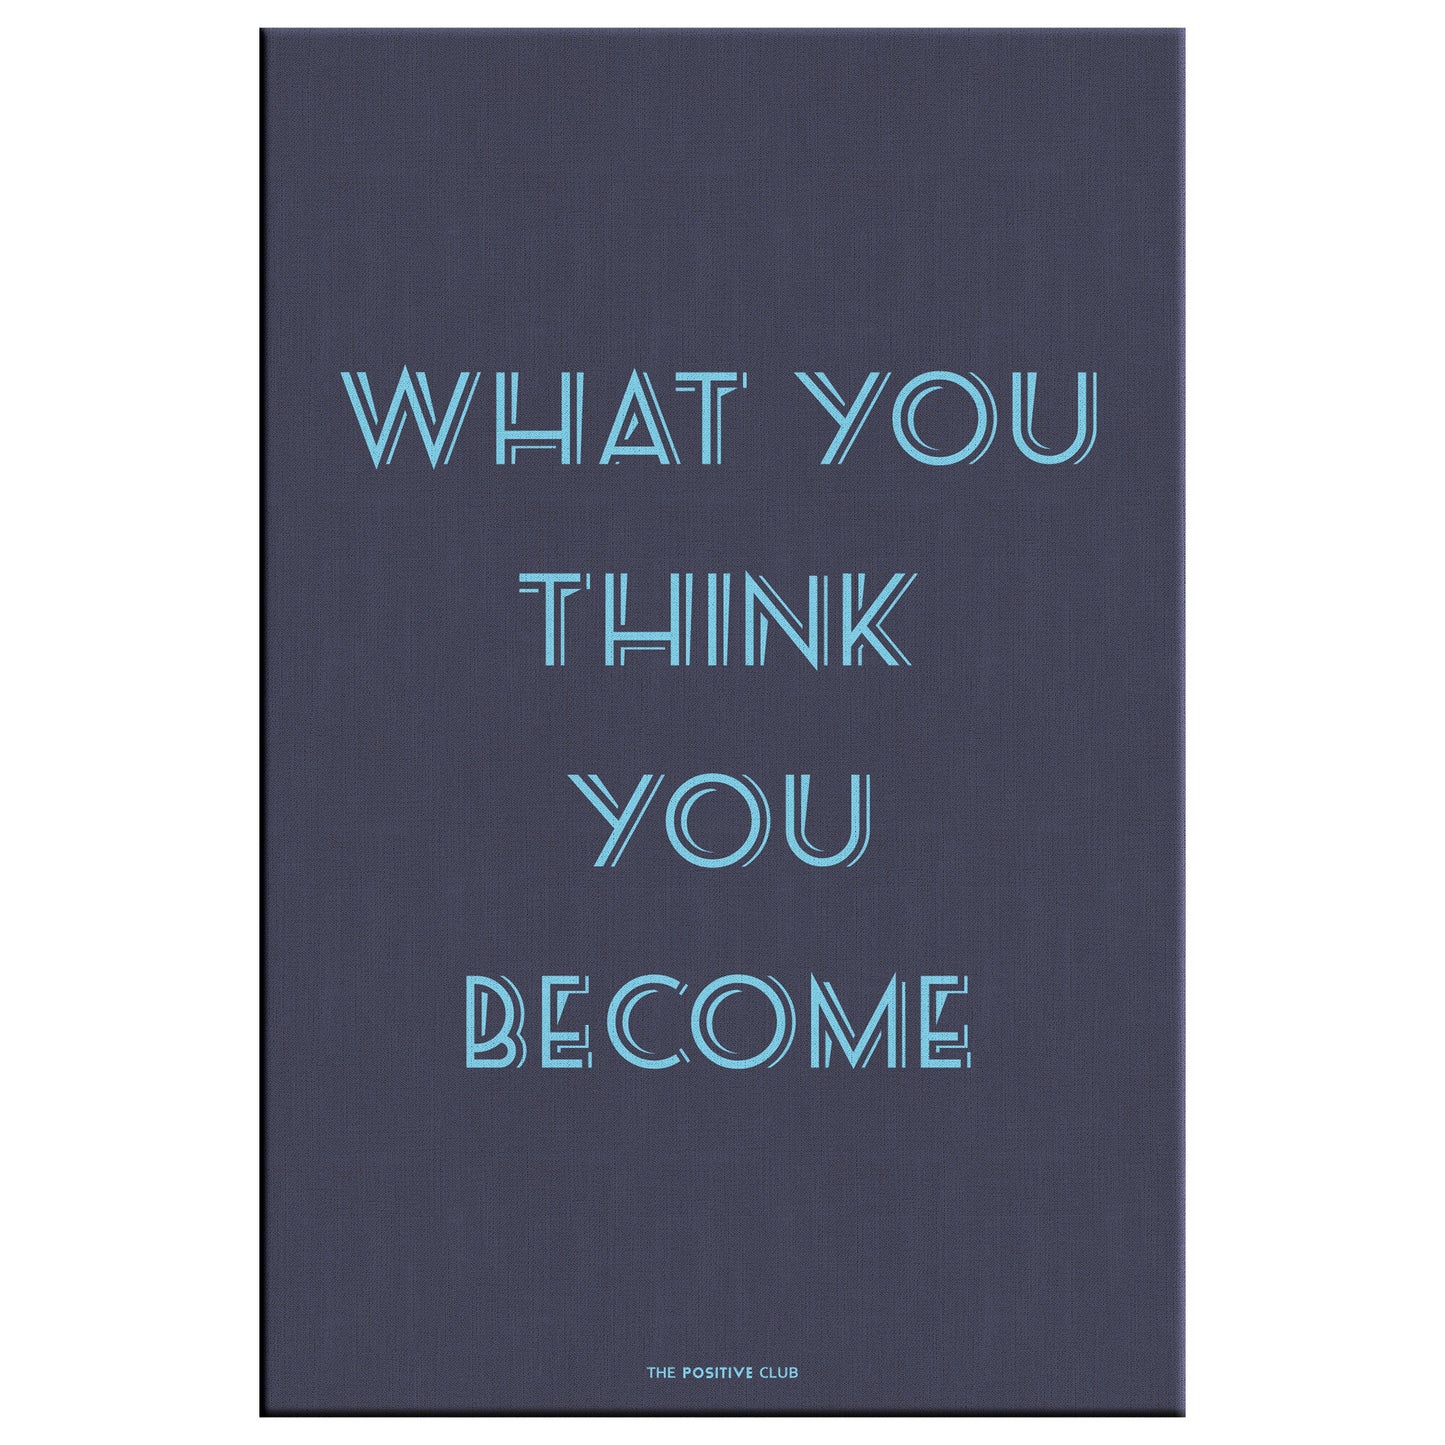 WHAT YOU THINK YOU BECOME